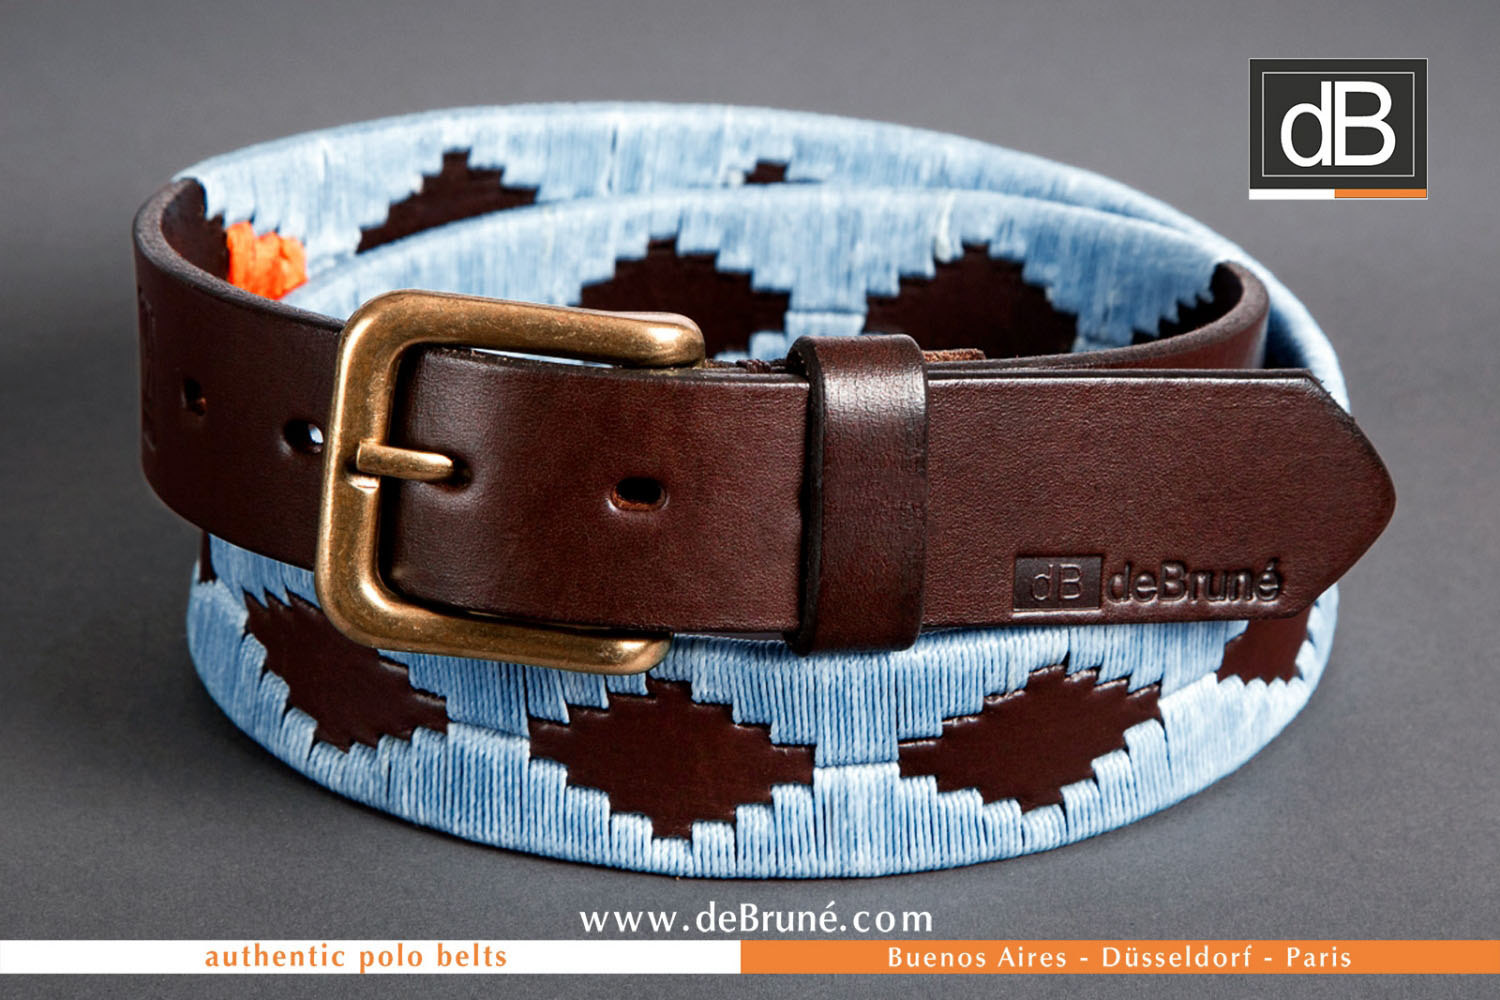 Gaucho Polo Belt Argentinian Gaucho Brown Real Leather Belt Premium Quality UK